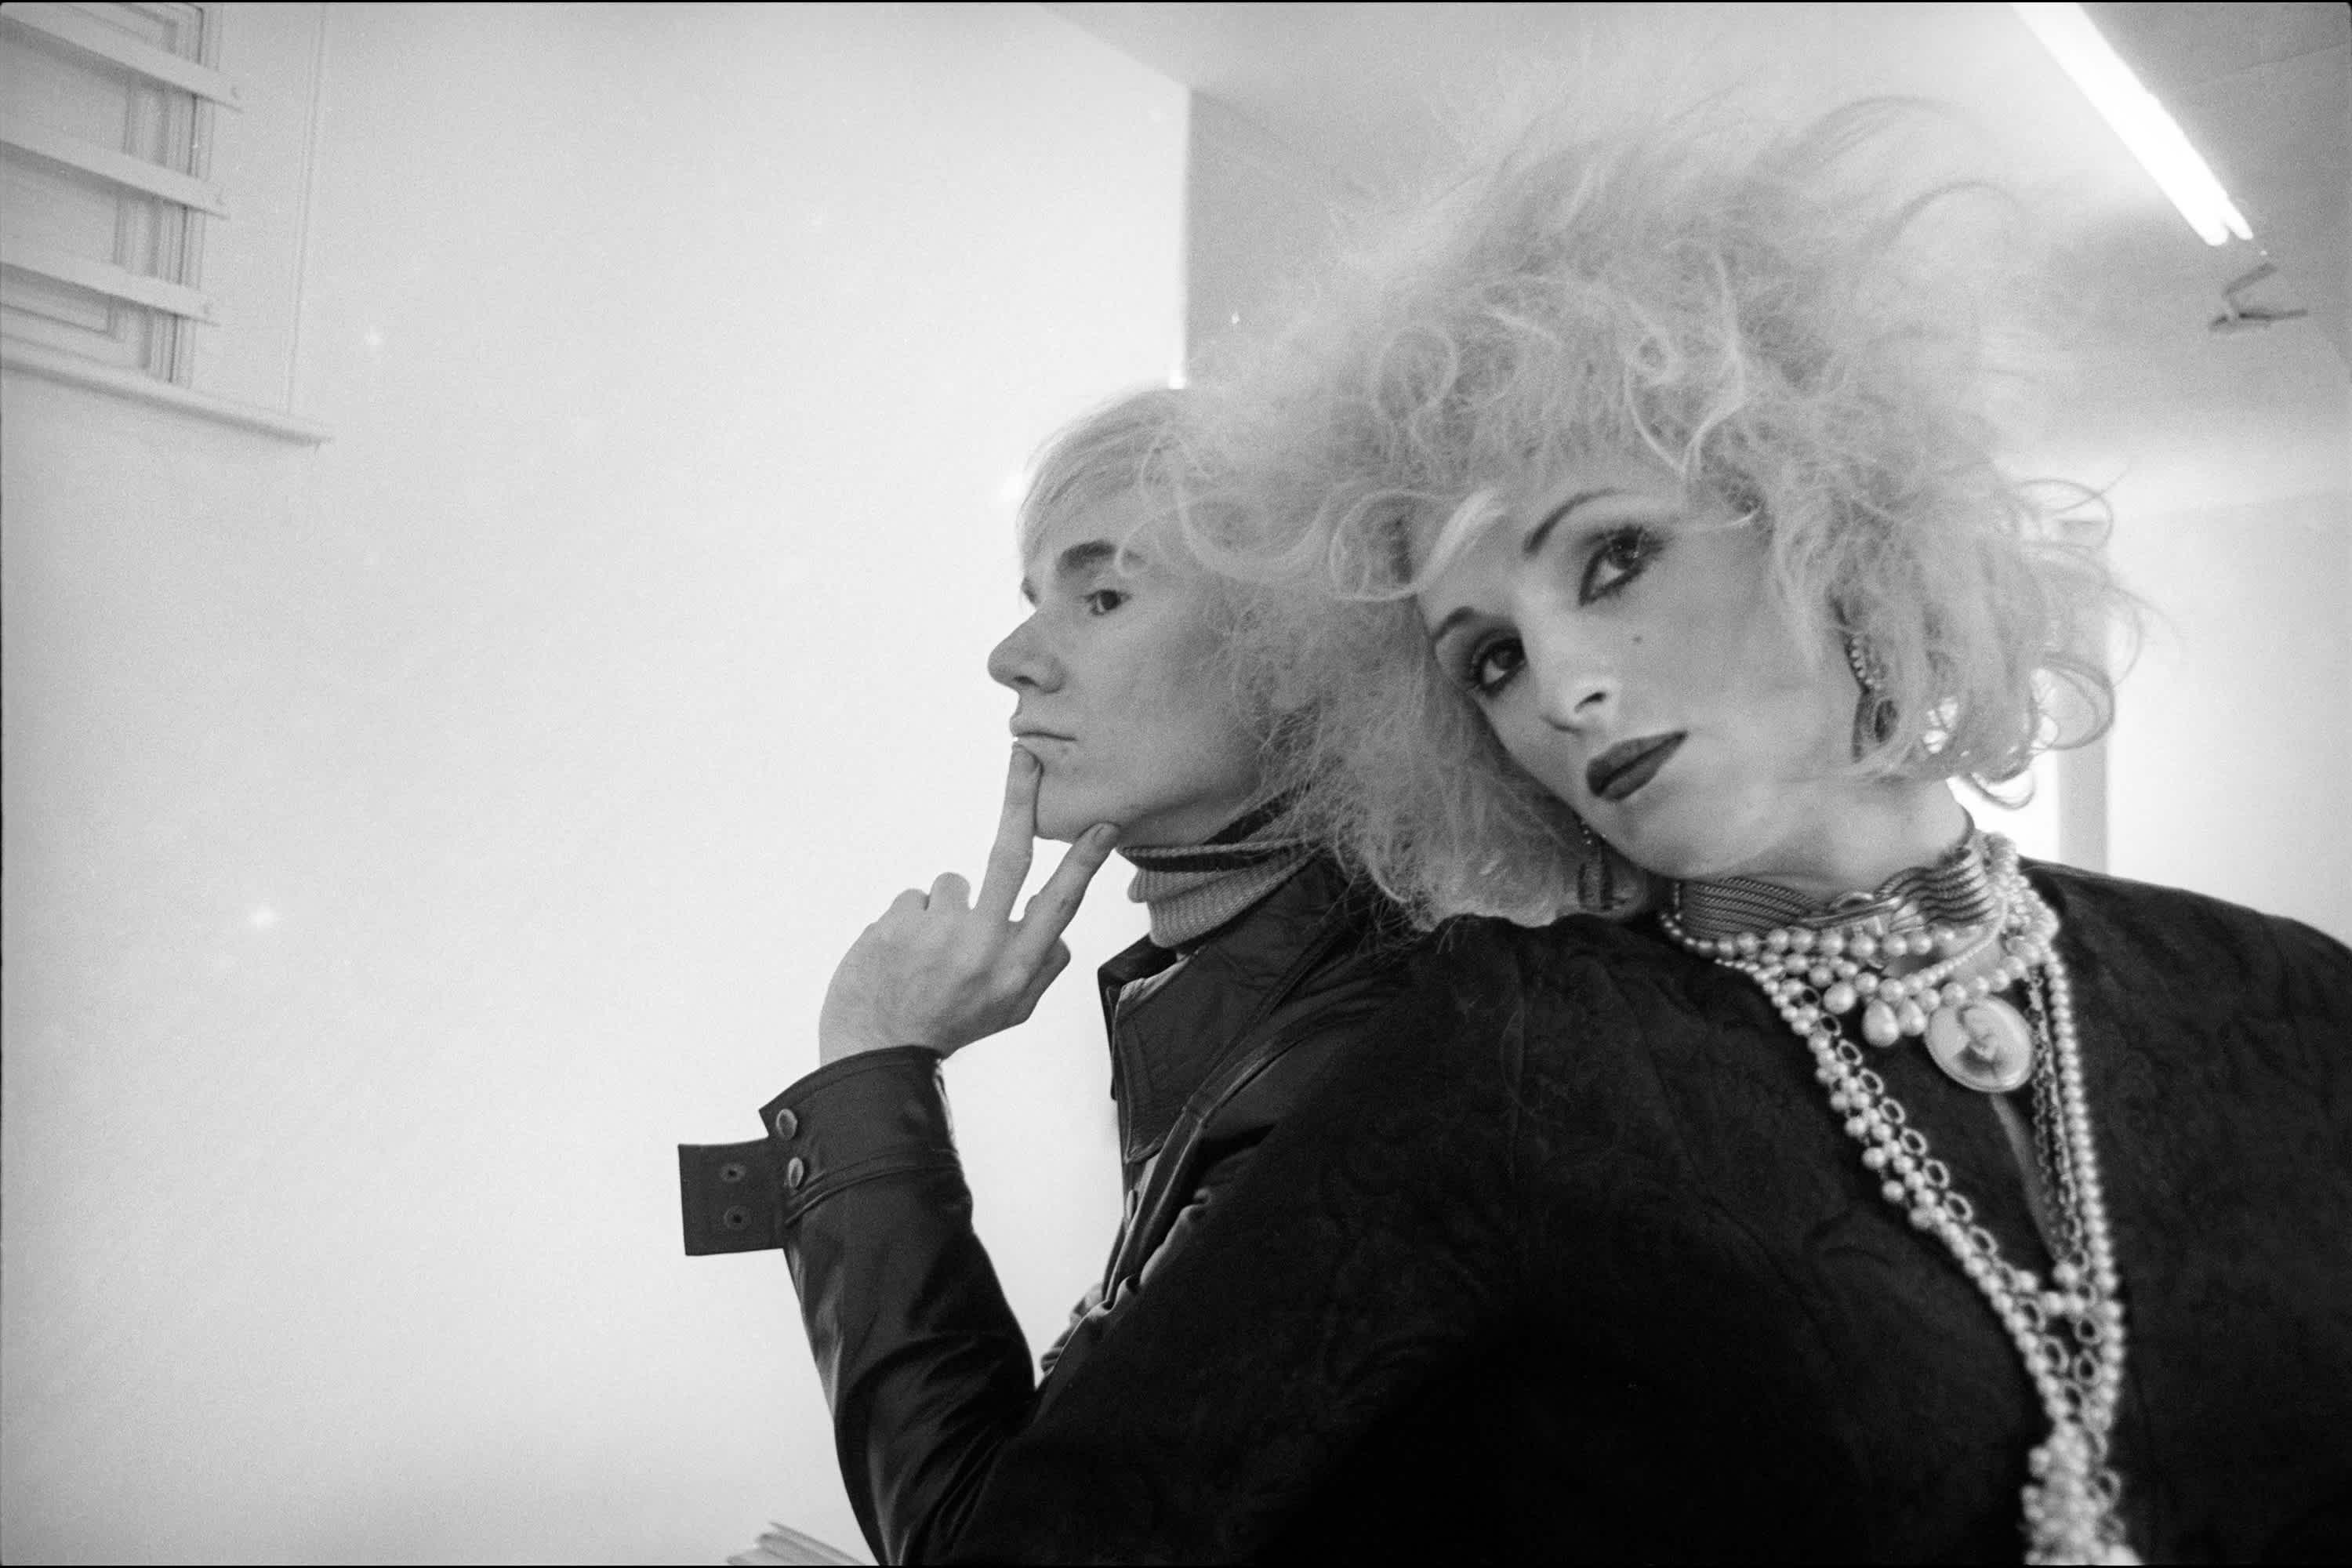 Andy Warhol and Candy Darling, 1969